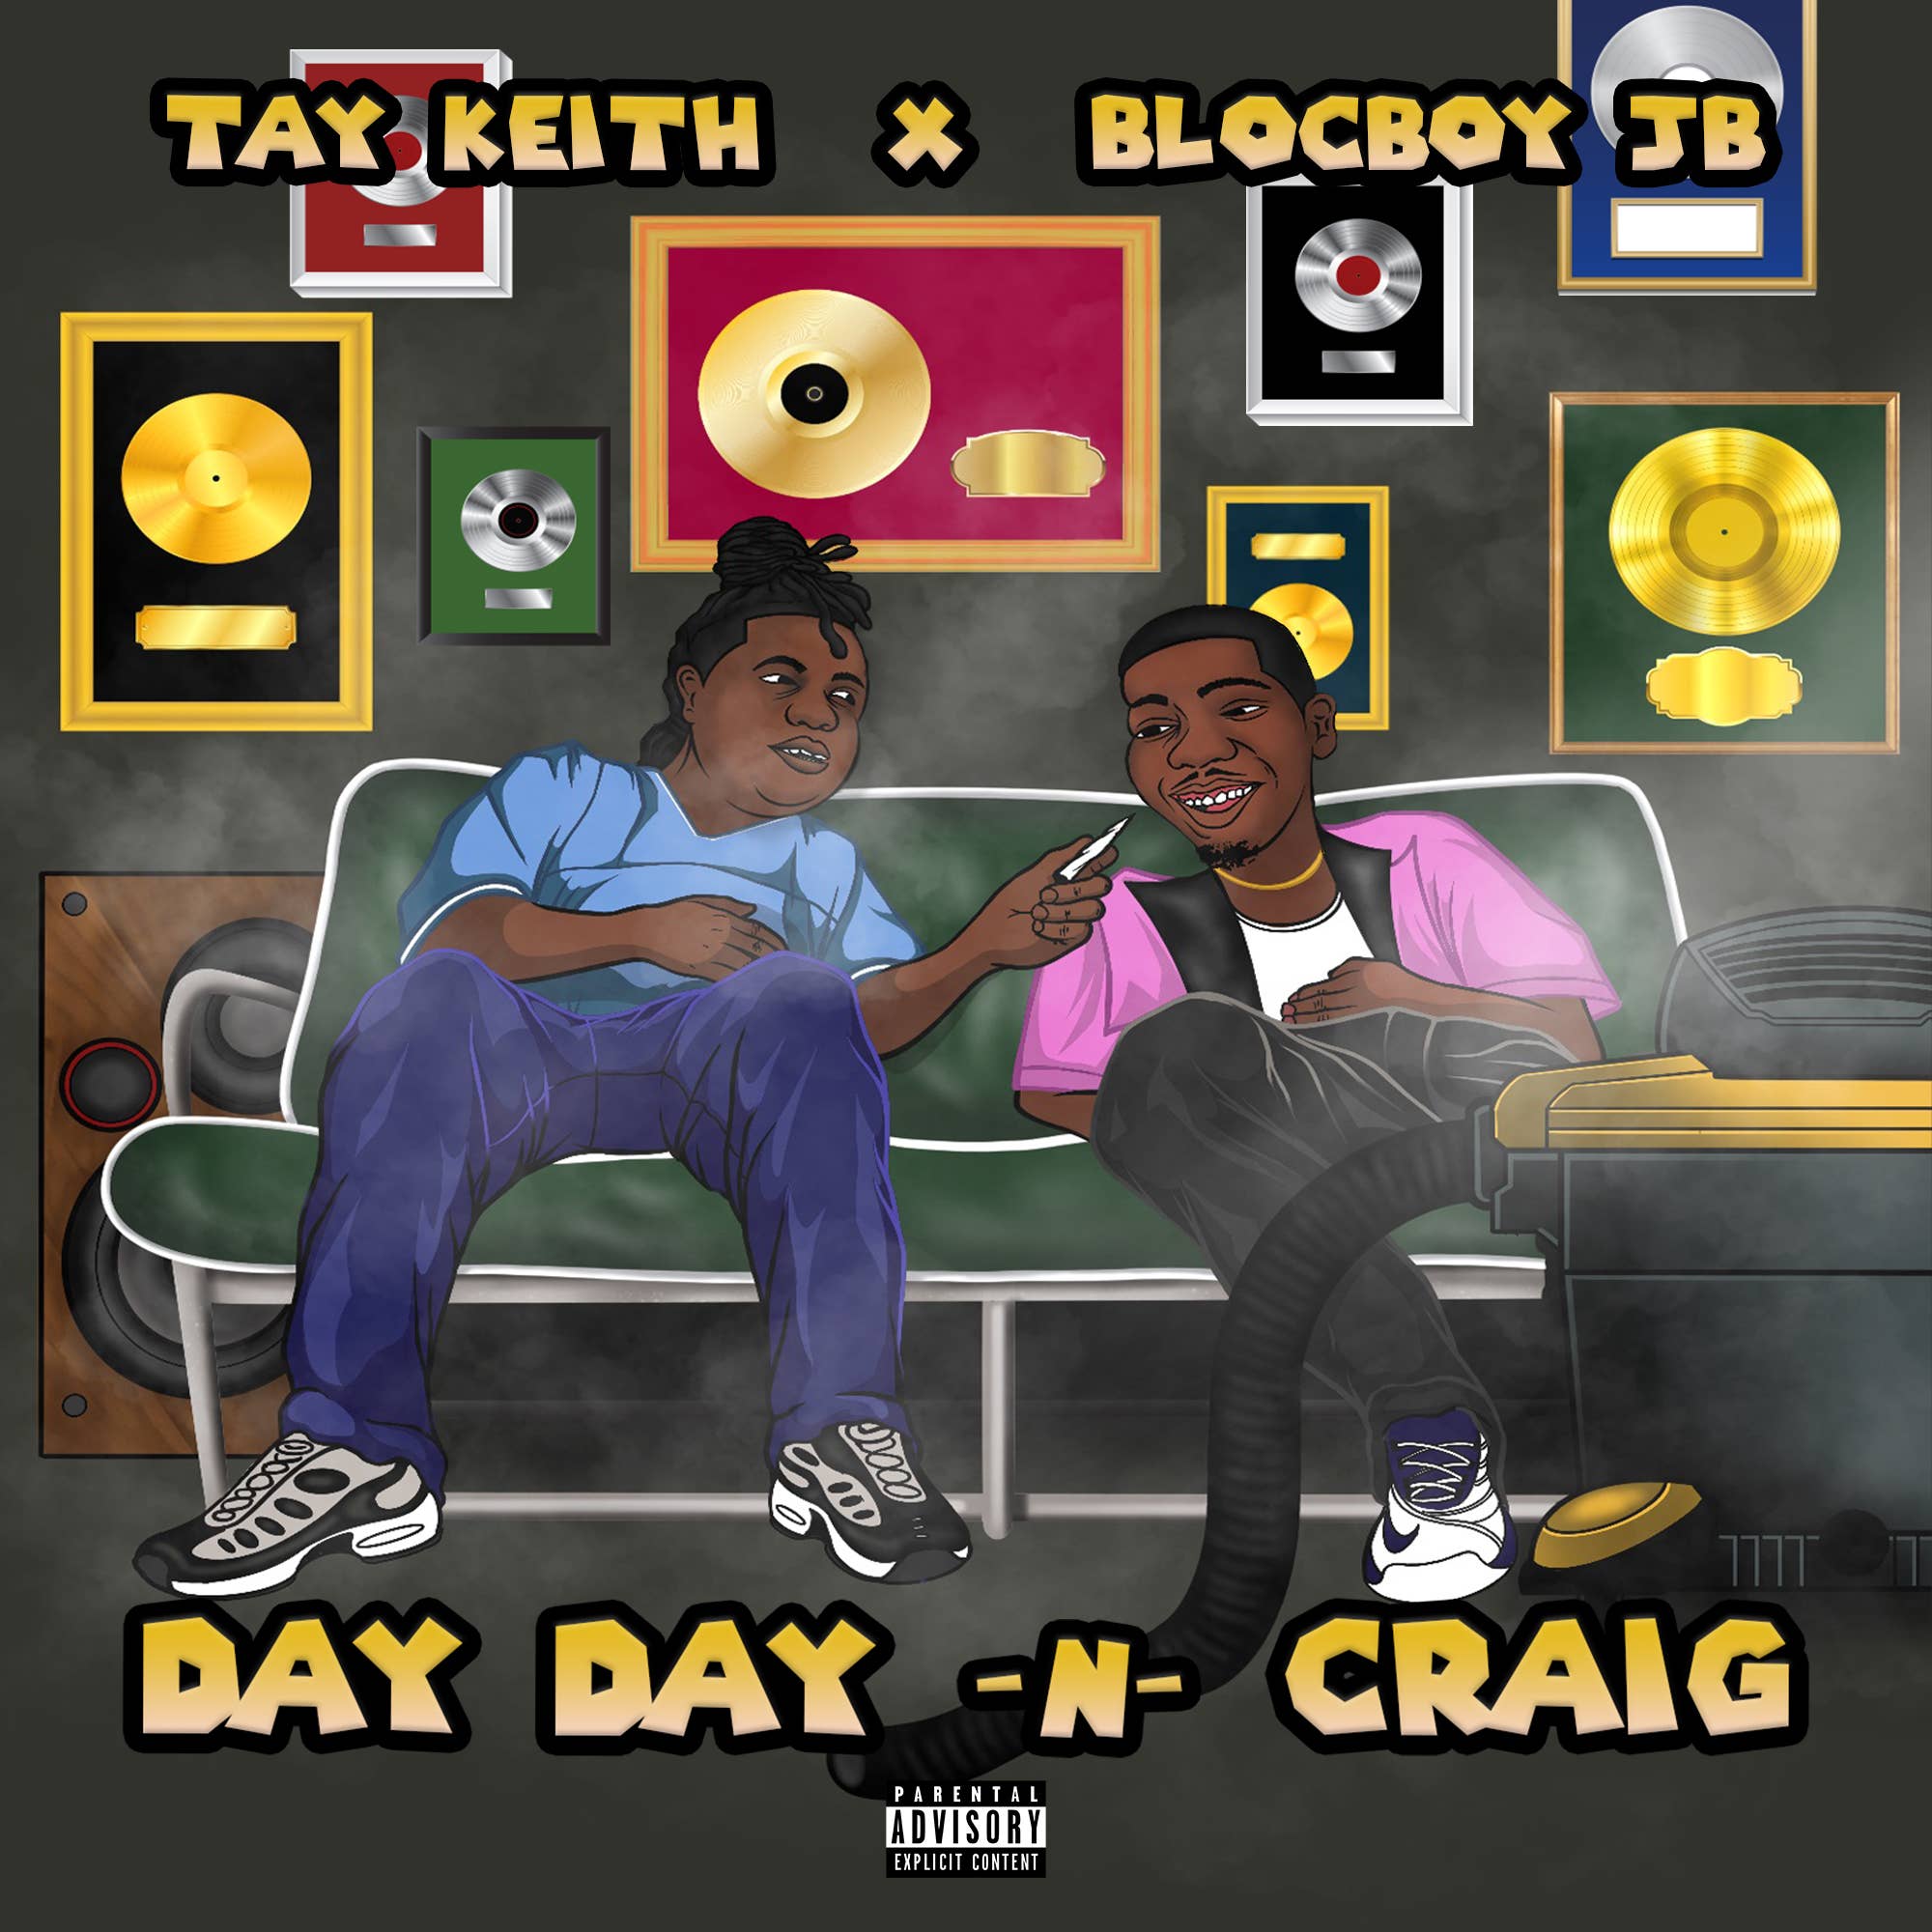 BlocBoy JB and Tay Keith "Day Day N Craig"